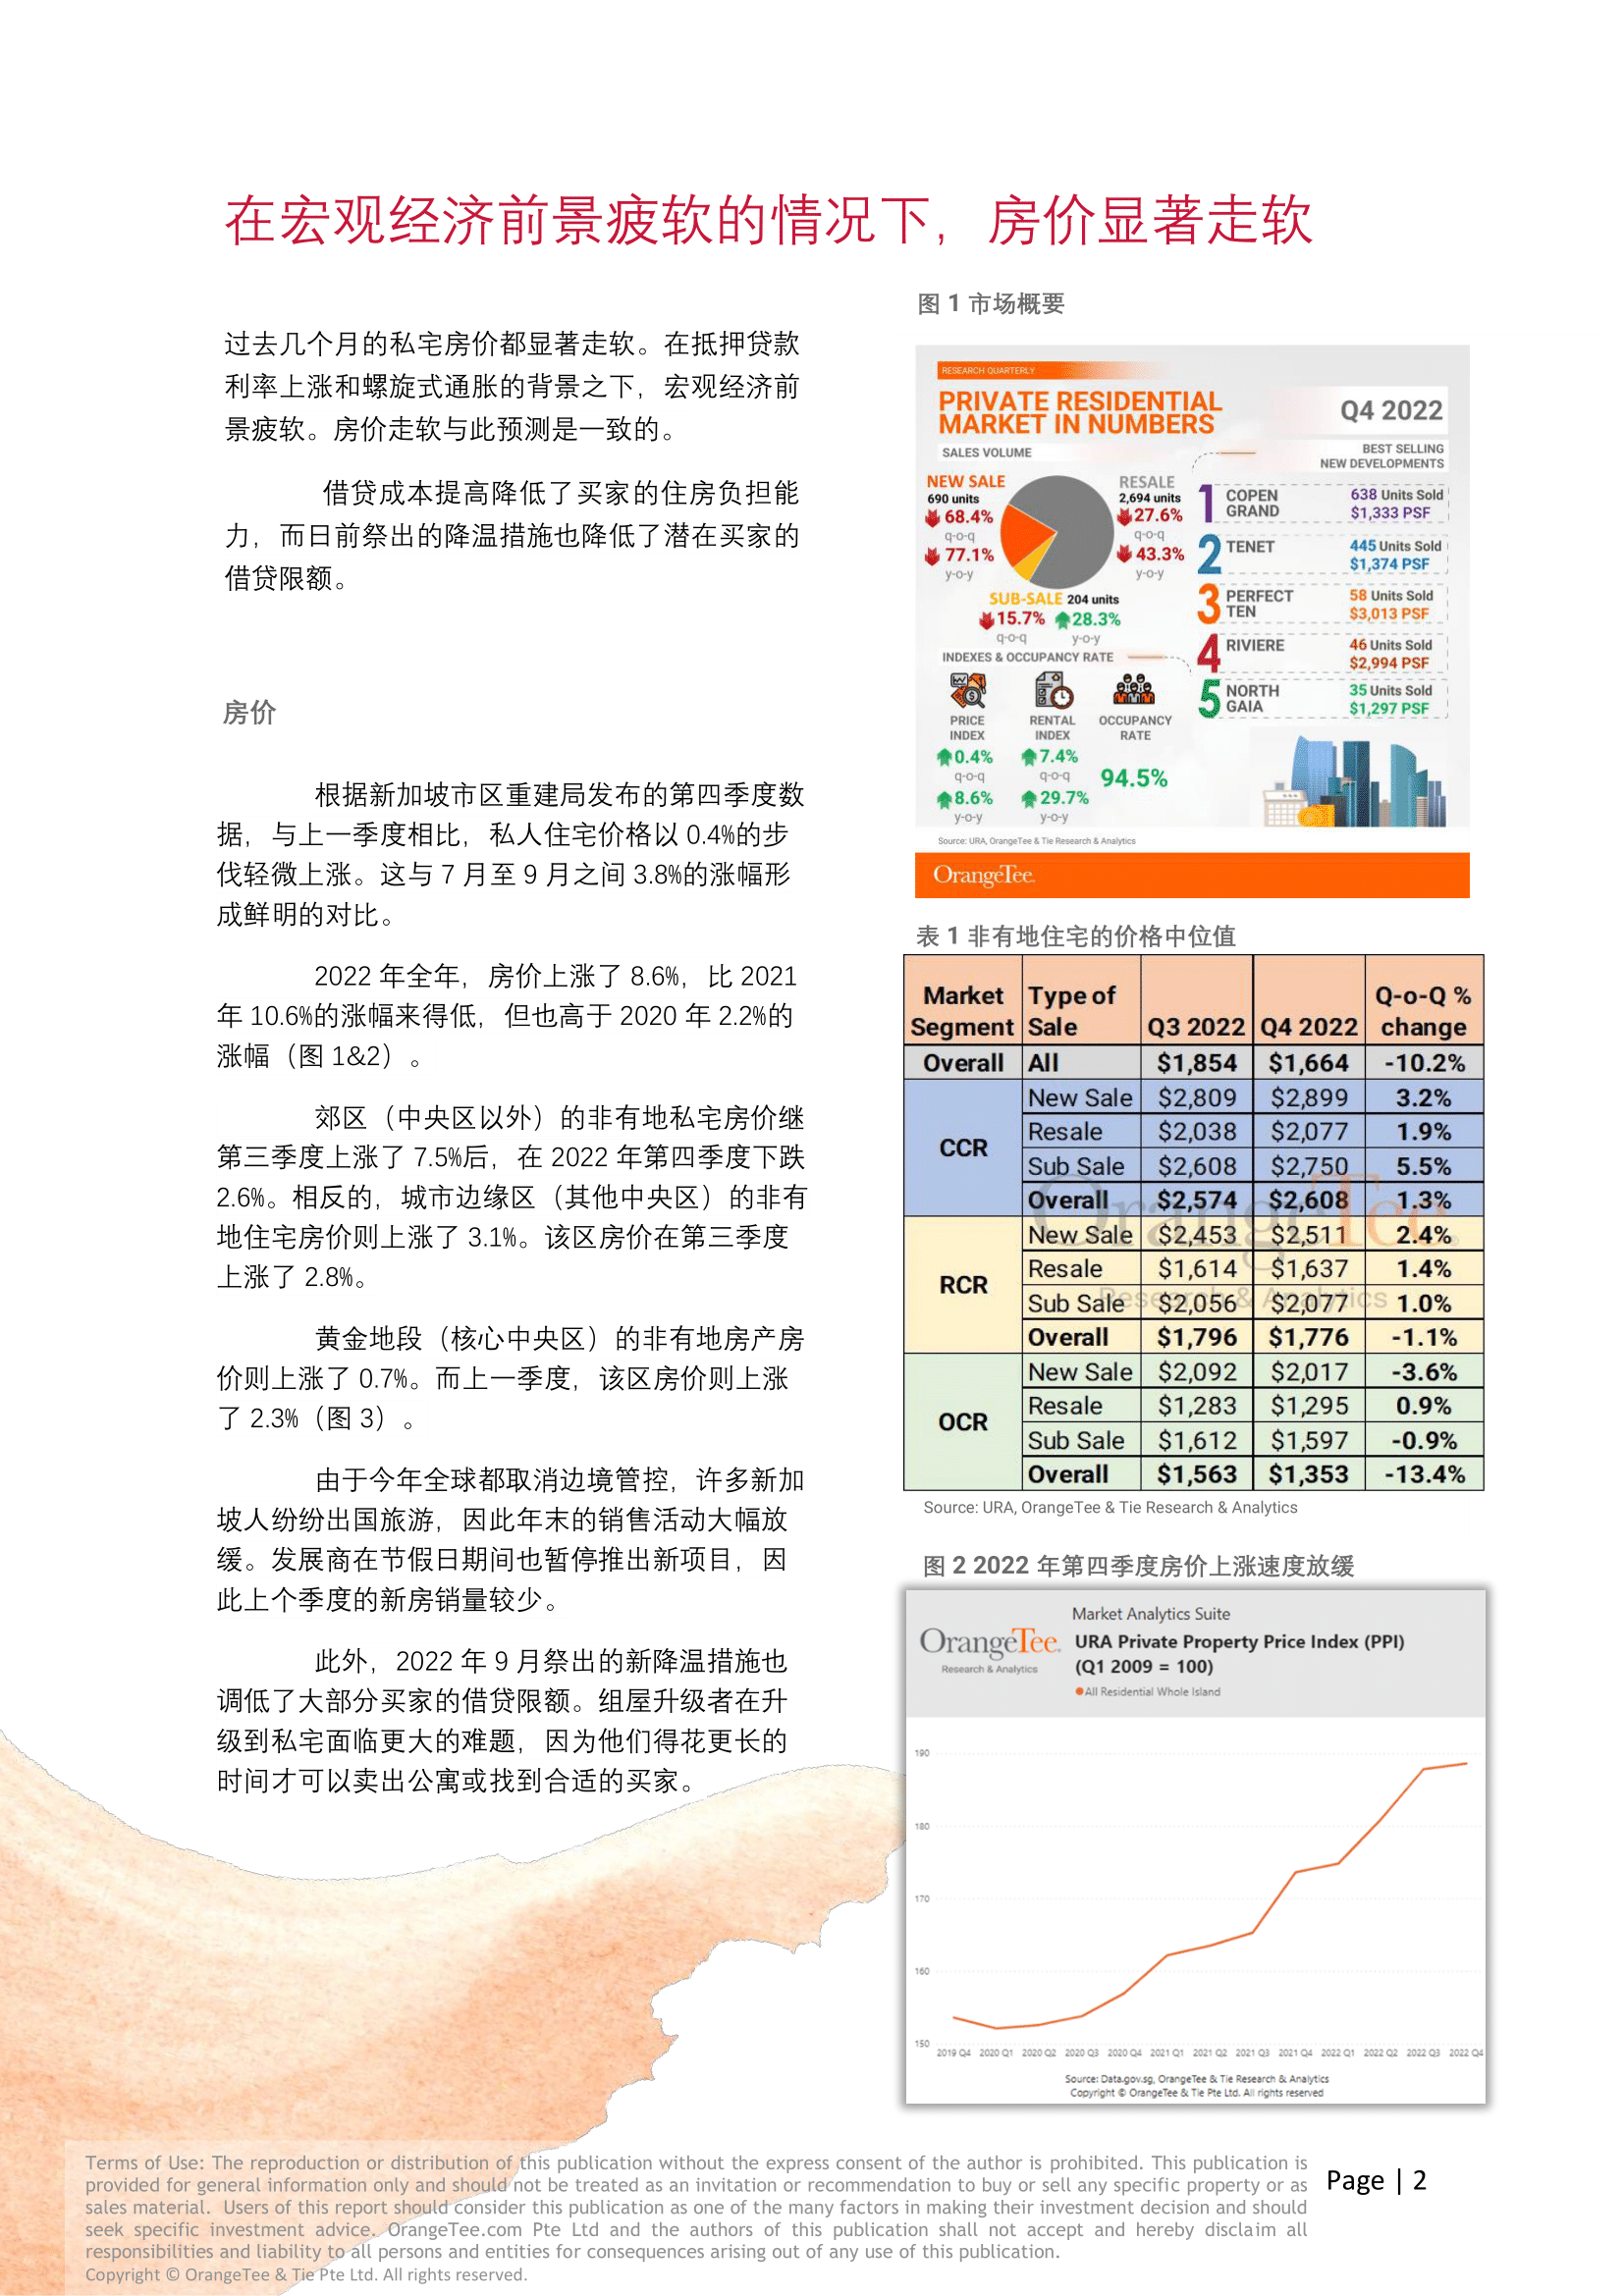 OrangeTee - Private Residential Market Report for Q4 2022 Chinese (1)-2.png